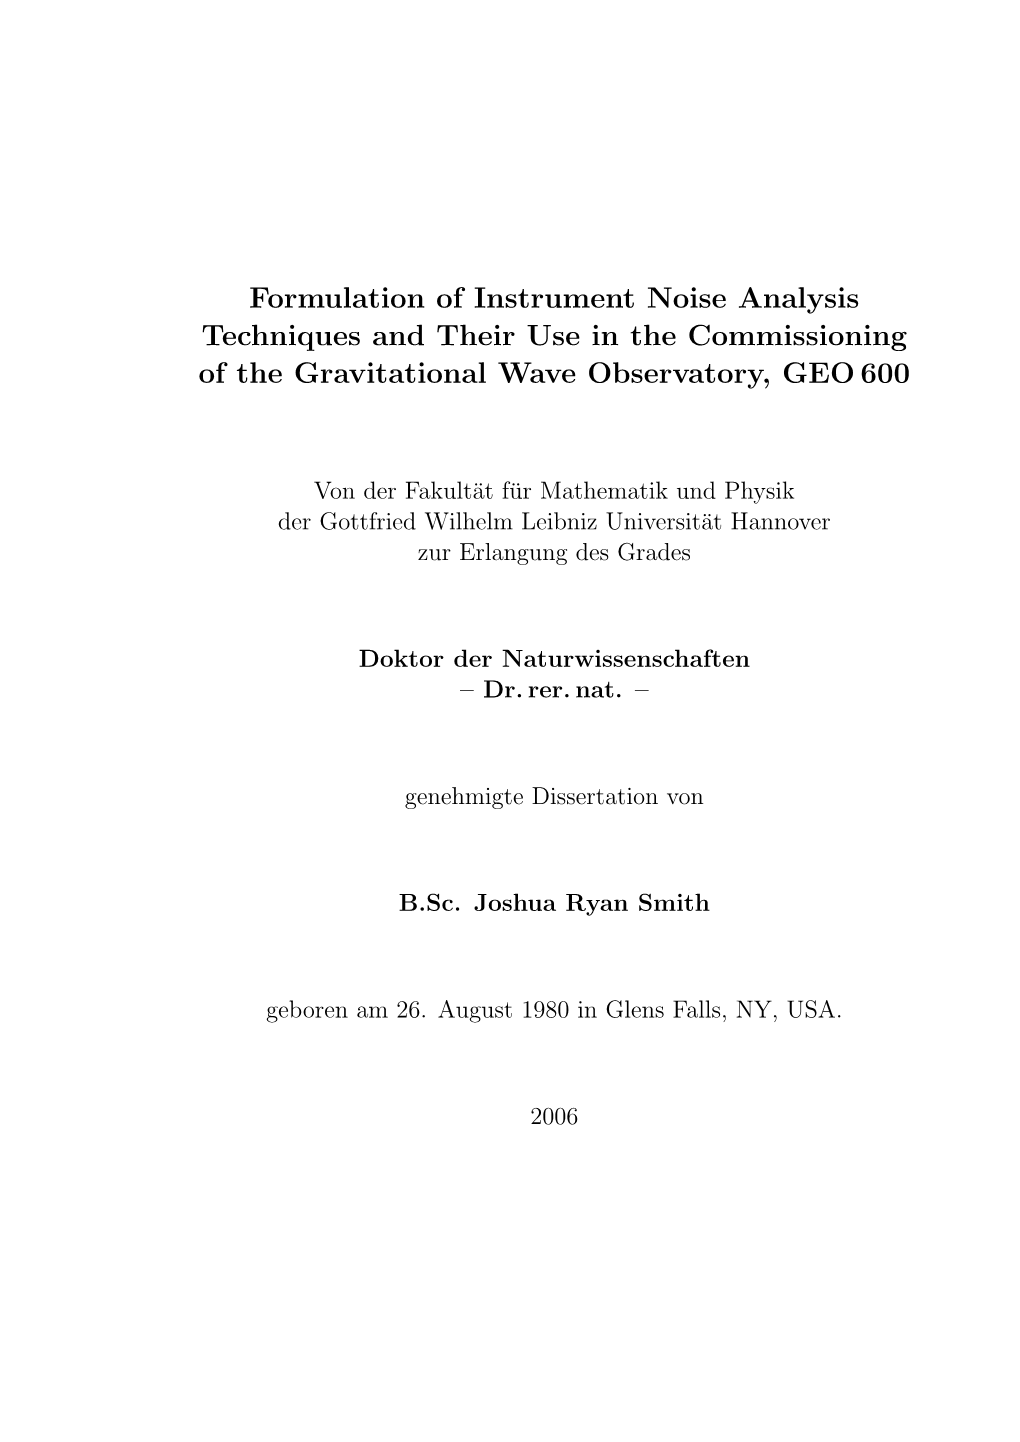 Formulation of Instrument Noise Analysis Techniques and Their Use in the Commissioning of the Gravitational Wave Observatory, GEO 600